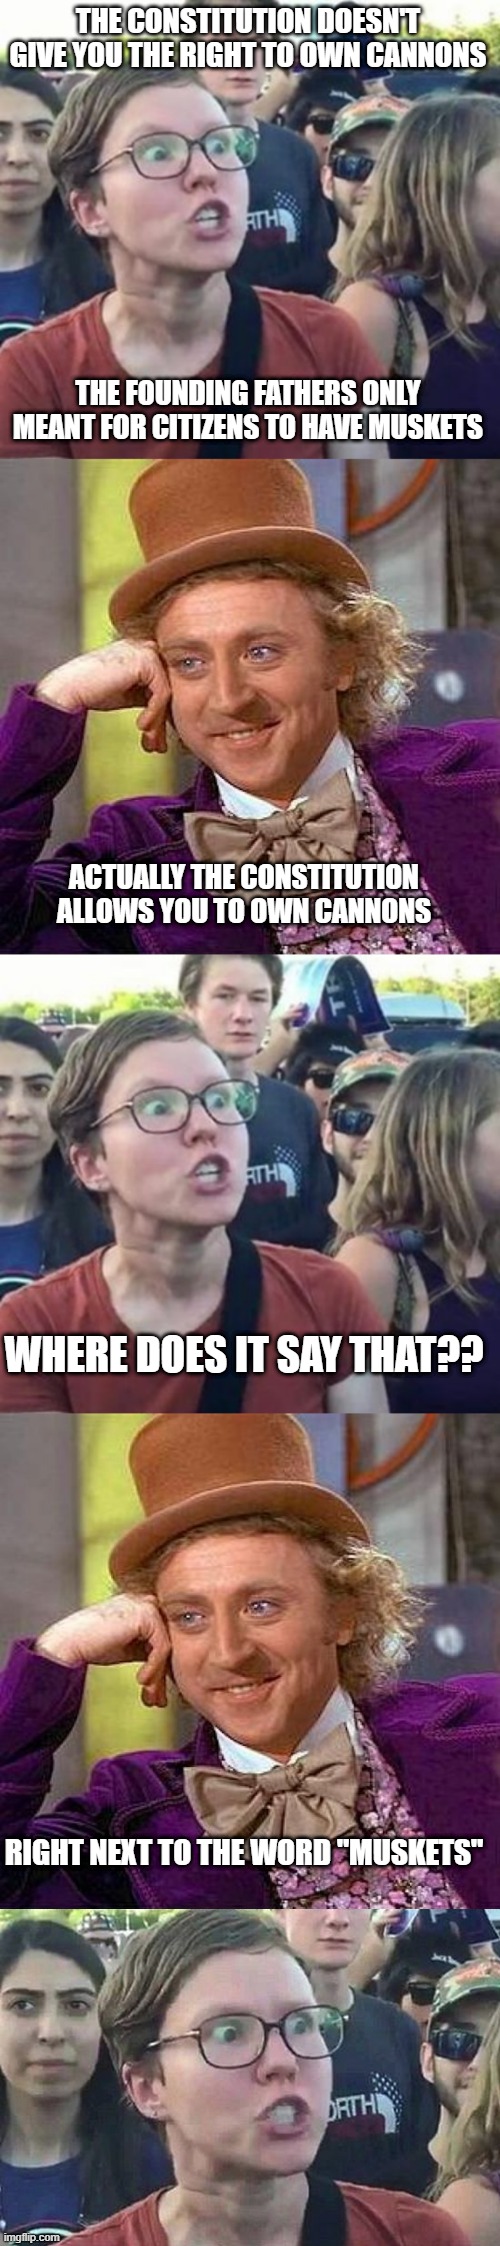 THE CONSTITUTION DOESN'T GIVE YOU THE RIGHT TO OWN CANNONS THE FOUNDING FATHERS ONLY MEANT FOR CITIZENS TO HAVE MUSKETS ACTUALLY THE CONSTIT | image tagged in trigger a leftist,memes,creepy condescending wonka,triggered liberal | made w/ Imgflip meme maker